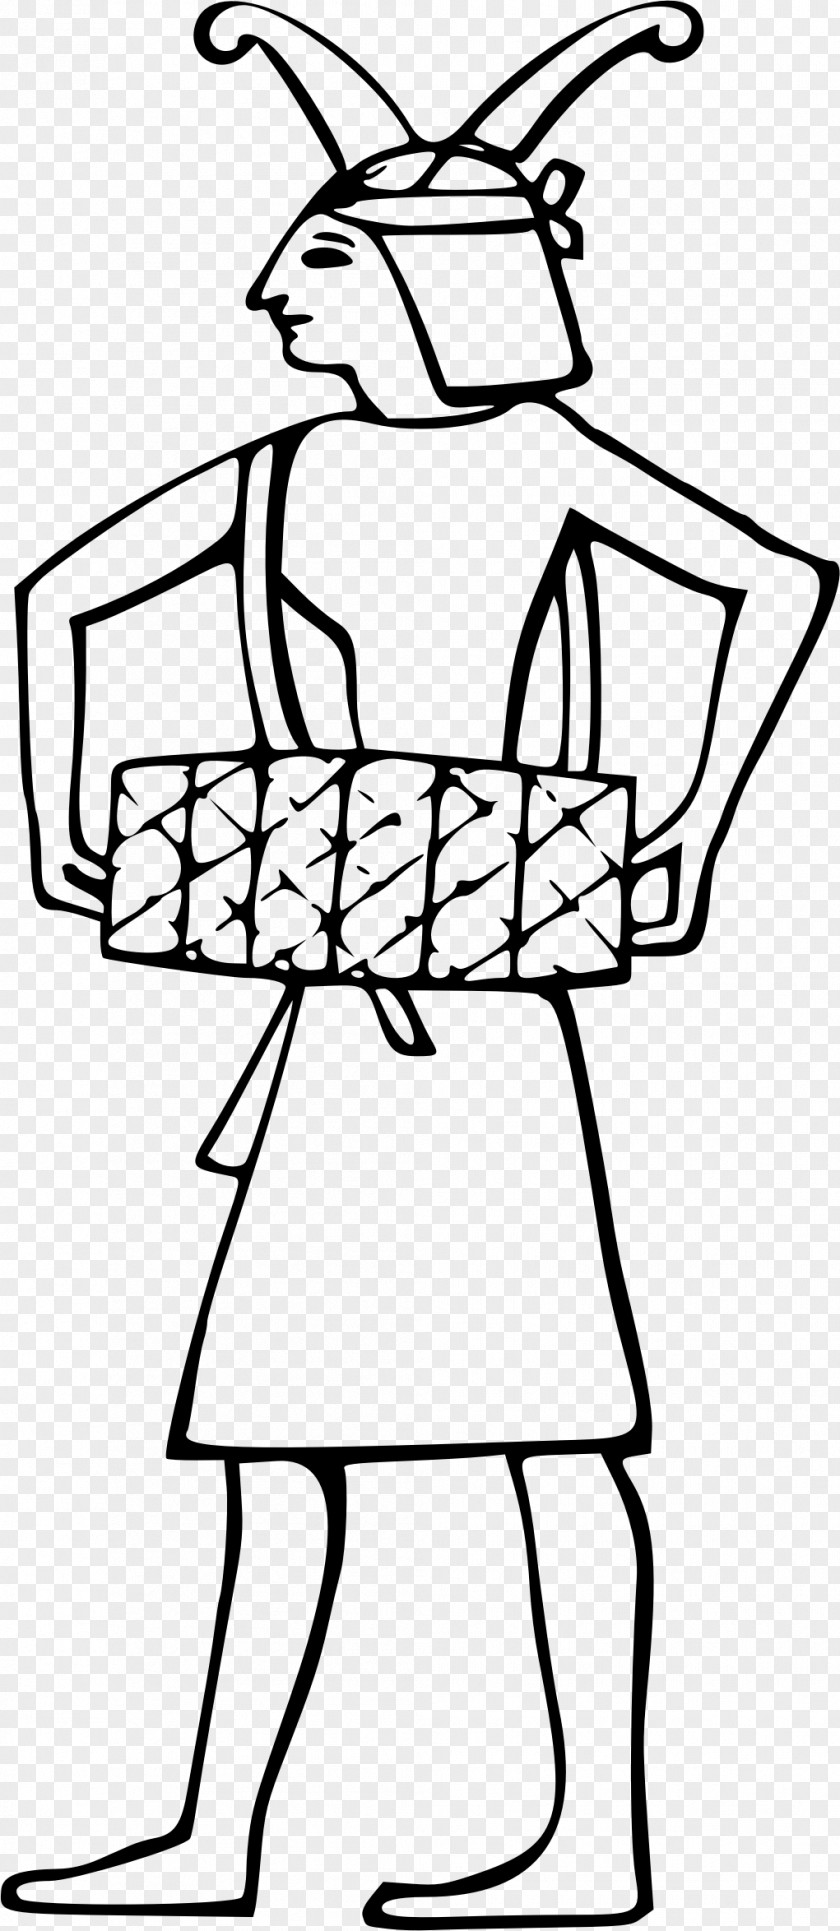 Egyptian Ancient Egypt Drawing Drummer Clip Art PNG